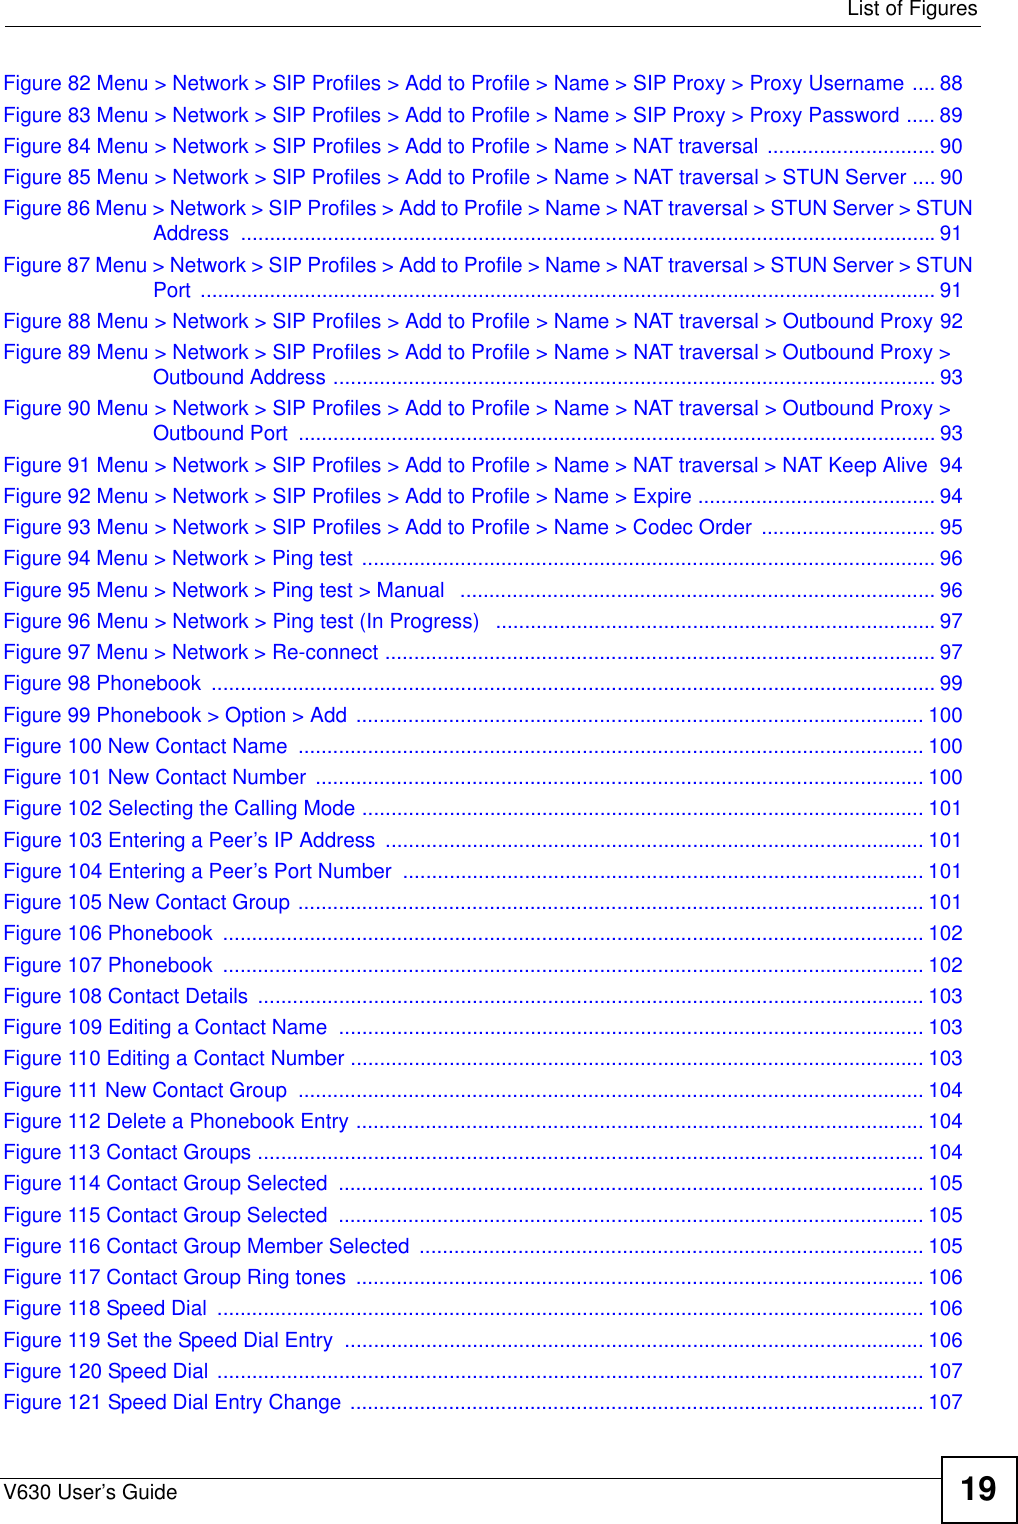  List of FiguresV630 User’s Guide 19Figure 82 Menu &gt; Network &gt; SIP Profiles &gt; Add to Profile &gt; Name &gt; SIP Proxy &gt; Proxy Username .... 88Figure 83 Menu &gt; Network &gt; SIP Profiles &gt; Add to Profile &gt; Name &gt; SIP Proxy &gt; Proxy Password ..... 89Figure 84 Menu &gt; Network &gt; SIP Profiles &gt; Add to Profile &gt; Name &gt; NAT traversal  ............................. 90Figure 85 Menu &gt; Network &gt; SIP Profiles &gt; Add to Profile &gt; Name &gt; NAT traversal &gt; STUN Server .... 90Figure 86 Menu &gt; Network &gt; SIP Profiles &gt; Add to Profile &gt; Name &gt; NAT traversal &gt; STUN Server &gt; STUN Address ........................................................................................................................91Figure 87 Menu &gt; Network &gt; SIP Profiles &gt; Add to Profile &gt; Name &gt; NAT traversal &gt; STUN Server &gt; STUN Port ............................................................................................................................... 91Figure 88 Menu &gt; Network &gt; SIP Profiles &gt; Add to Profile &gt; Name &gt; NAT traversal &gt; Outbound Proxy 92Figure 89 Menu &gt; Network &gt; SIP Profiles &gt; Add to Profile &gt; Name &gt; NAT traversal &gt; Outbound Proxy &gt; Outbound Address ........................................................................................................ 93Figure 90 Menu &gt; Network &gt; SIP Profiles &gt; Add to Profile &gt; Name &gt; NAT traversal &gt; Outbound Proxy &gt; Outbound Port  .............................................................................................................. 93Figure 91 Menu &gt; Network &gt; SIP Profiles &gt; Add to Profile &gt; Name &gt; NAT traversal &gt; NAT Keep Alive  94Figure 92 Menu &gt; Network &gt; SIP Profiles &gt; Add to Profile &gt; Name &gt; Expire ......................................... 94Figure 93 Menu &gt; Network &gt; SIP Profiles &gt; Add to Profile &gt; Name &gt; Codec Order  .............................. 95Figure 94 Menu &gt; Network &gt; Ping test ................................................................................................... 96Figure 95 Menu &gt; Network &gt; Ping test &gt; Manual   .................................................................................. 96Figure 96 Menu &gt; Network &gt; Ping test (In Progress)   ............................................................................97Figure 97 Menu &gt; Network &gt; Re-connect ............................................................................................... 97Figure 98 Phonebook  ............................................................................................................................. 99Figure 99 Phonebook &gt; Option &gt; Add .................................................................................................. 100Figure 100 New Contact Name  ............................................................................................................ 100Figure 101 New Contact Number  ......................................................................................................... 100Figure 102 Selecting the Calling Mode ................................................................................................. 101Figure 103 Entering a Peer’s IP Address  ............................................................................................. 101Figure 104 Entering a Peer’s Port Number  .......................................................................................... 101Figure 105 New Contact Group ............................................................................................................ 101Figure 106 Phonebook  ......................................................................................................................... 102Figure 107 Phonebook  ......................................................................................................................... 102Figure 108 Contact Details  ................................................................................................................... 103Figure 109 Editing a Contact Name  ..................................................................................................... 103Figure 110 Editing a Contact Number ................................................................................................... 103Figure 111 New Contact Group  ............................................................................................................ 104Figure 112 Delete a Phonebook Entry .................................................................................................. 104Figure 113 Contact Groups ................................................................................................................... 104Figure 114 Contact Group Selected  ..................................................................................................... 105Figure 115 Contact Group Selected  ..................................................................................................... 105Figure 116 Contact Group Member Selected  .......................................................................................105Figure 117 Contact Group Ring tones  .................................................................................................. 106Figure 118 Speed Dial  .......................................................................................................................... 106Figure 119 Set the Speed Dial Entry  .................................................................................................... 106Figure 120 Speed Dial .......................................................................................................................... 107Figure 121 Speed Dial Entry Change  ................................................................................................... 107